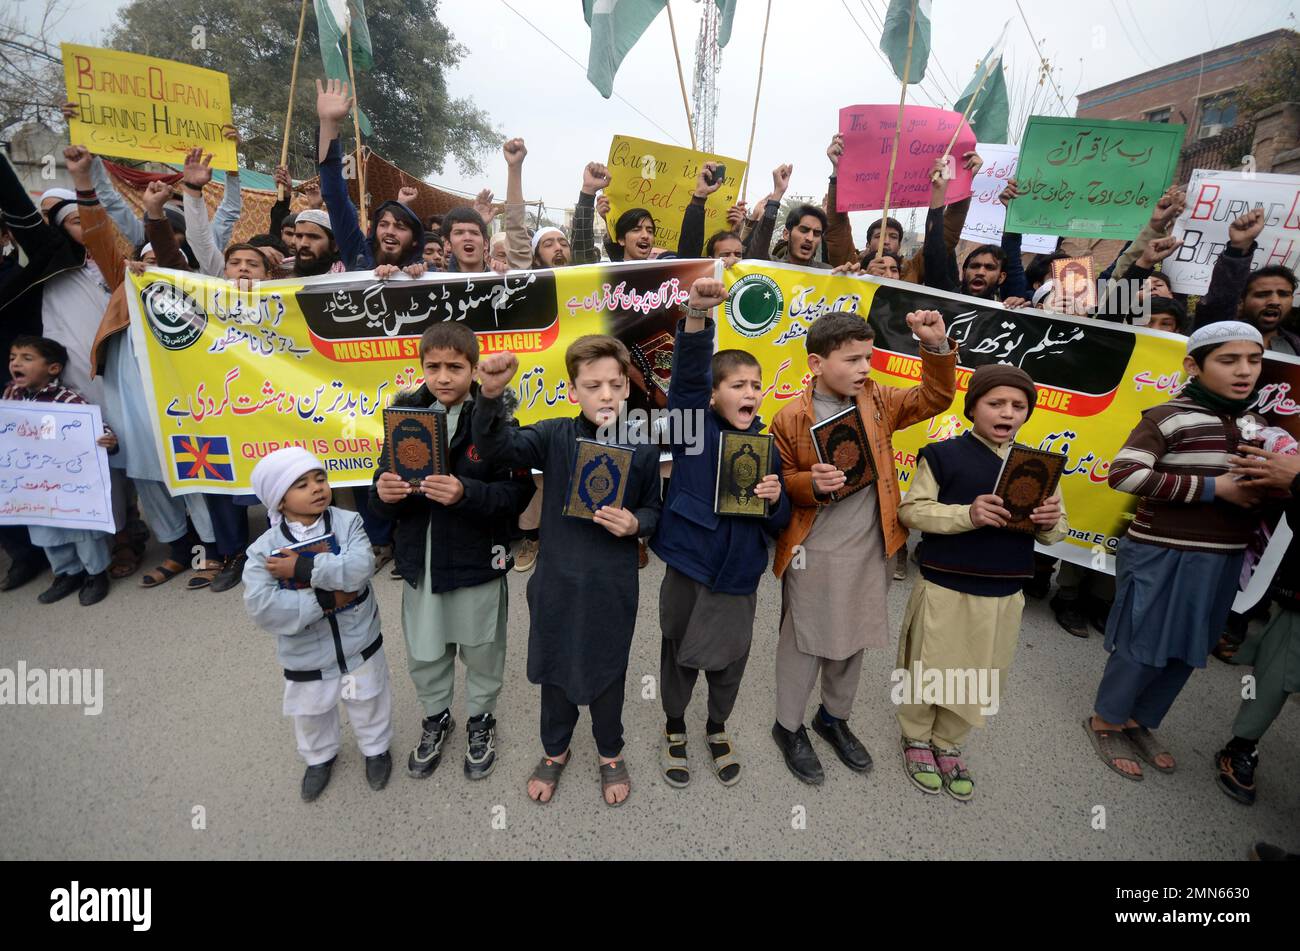 Peshawar, Pakistan. 29th Jan, 2023. Supporters of Muslim Man's League party hold a placard reading in Urdu 'Burning of the Koran is the worst type of terrorism by Sweden' during a protest against Sweden in Peshawar, Pakistan on Jan. 29, 2023. Pakistani Prime Minister Shahbaz Sharif, several Arab countries as well as Turkey condemned on 23 January, Islamophobia after Swedish-Danish far-right politician Rasmus Paludan burned a copy of the Koran at a rally in Stockholm on 21 January. (Photo by Hussain Ali/Pacific Press/Sipa USA) Credit: Sipa USA/Alamy Live News Stock Photo